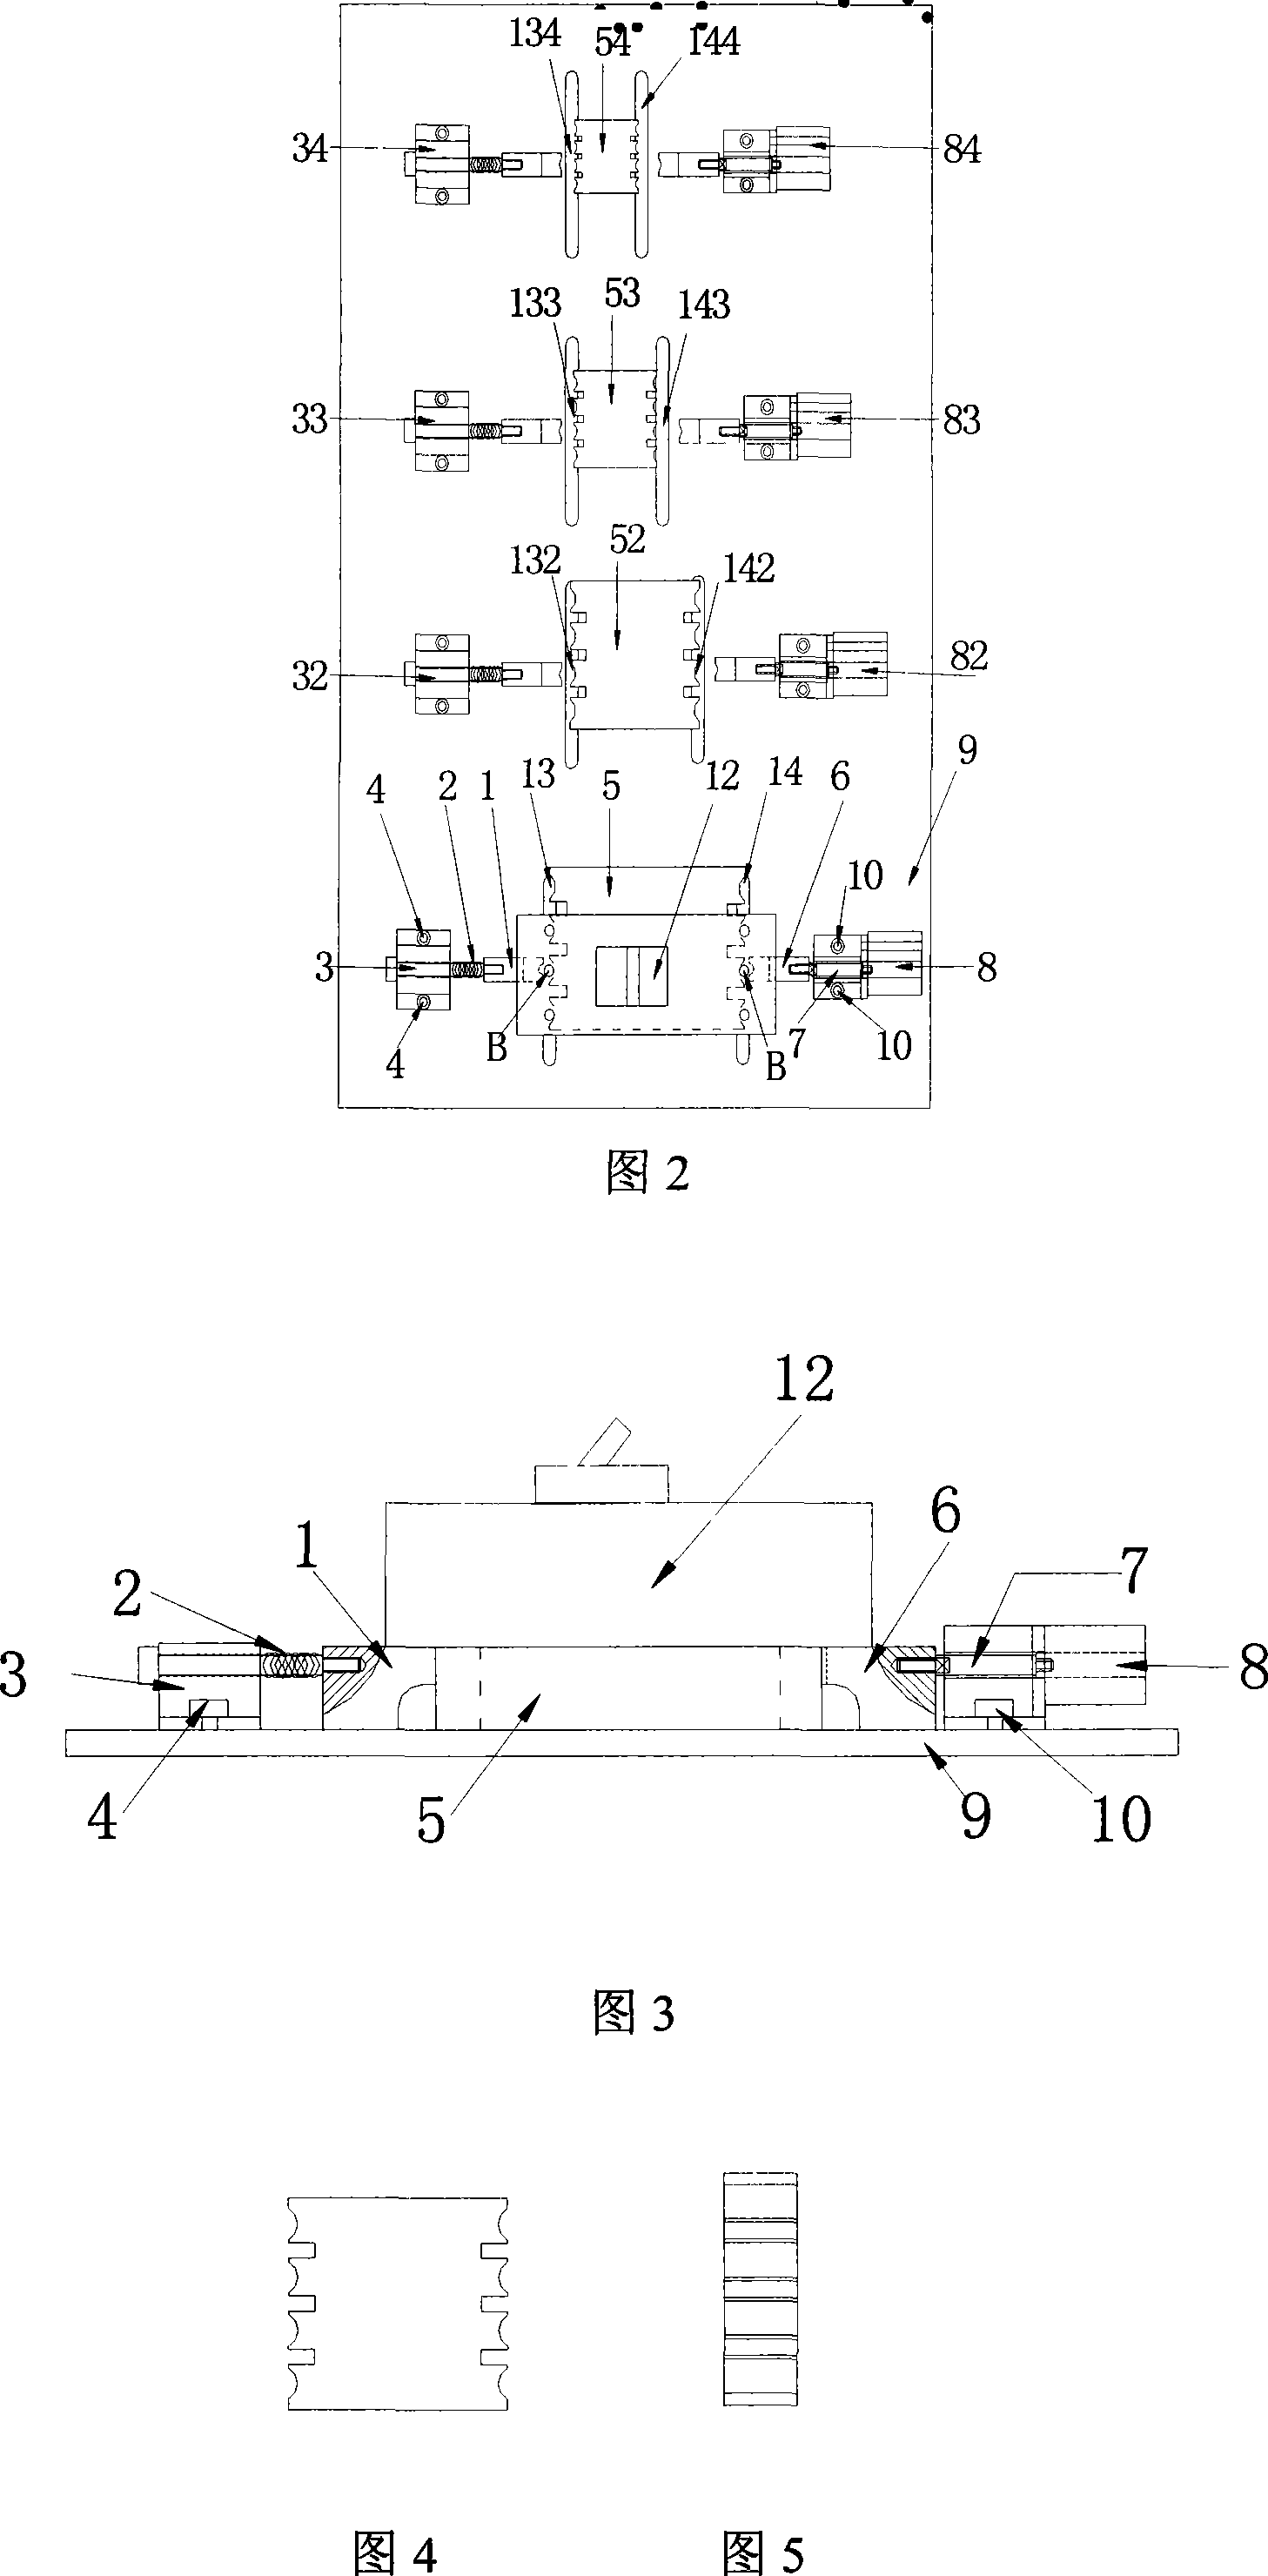 Board back insertion type circuit breaker characteristic detection and test device